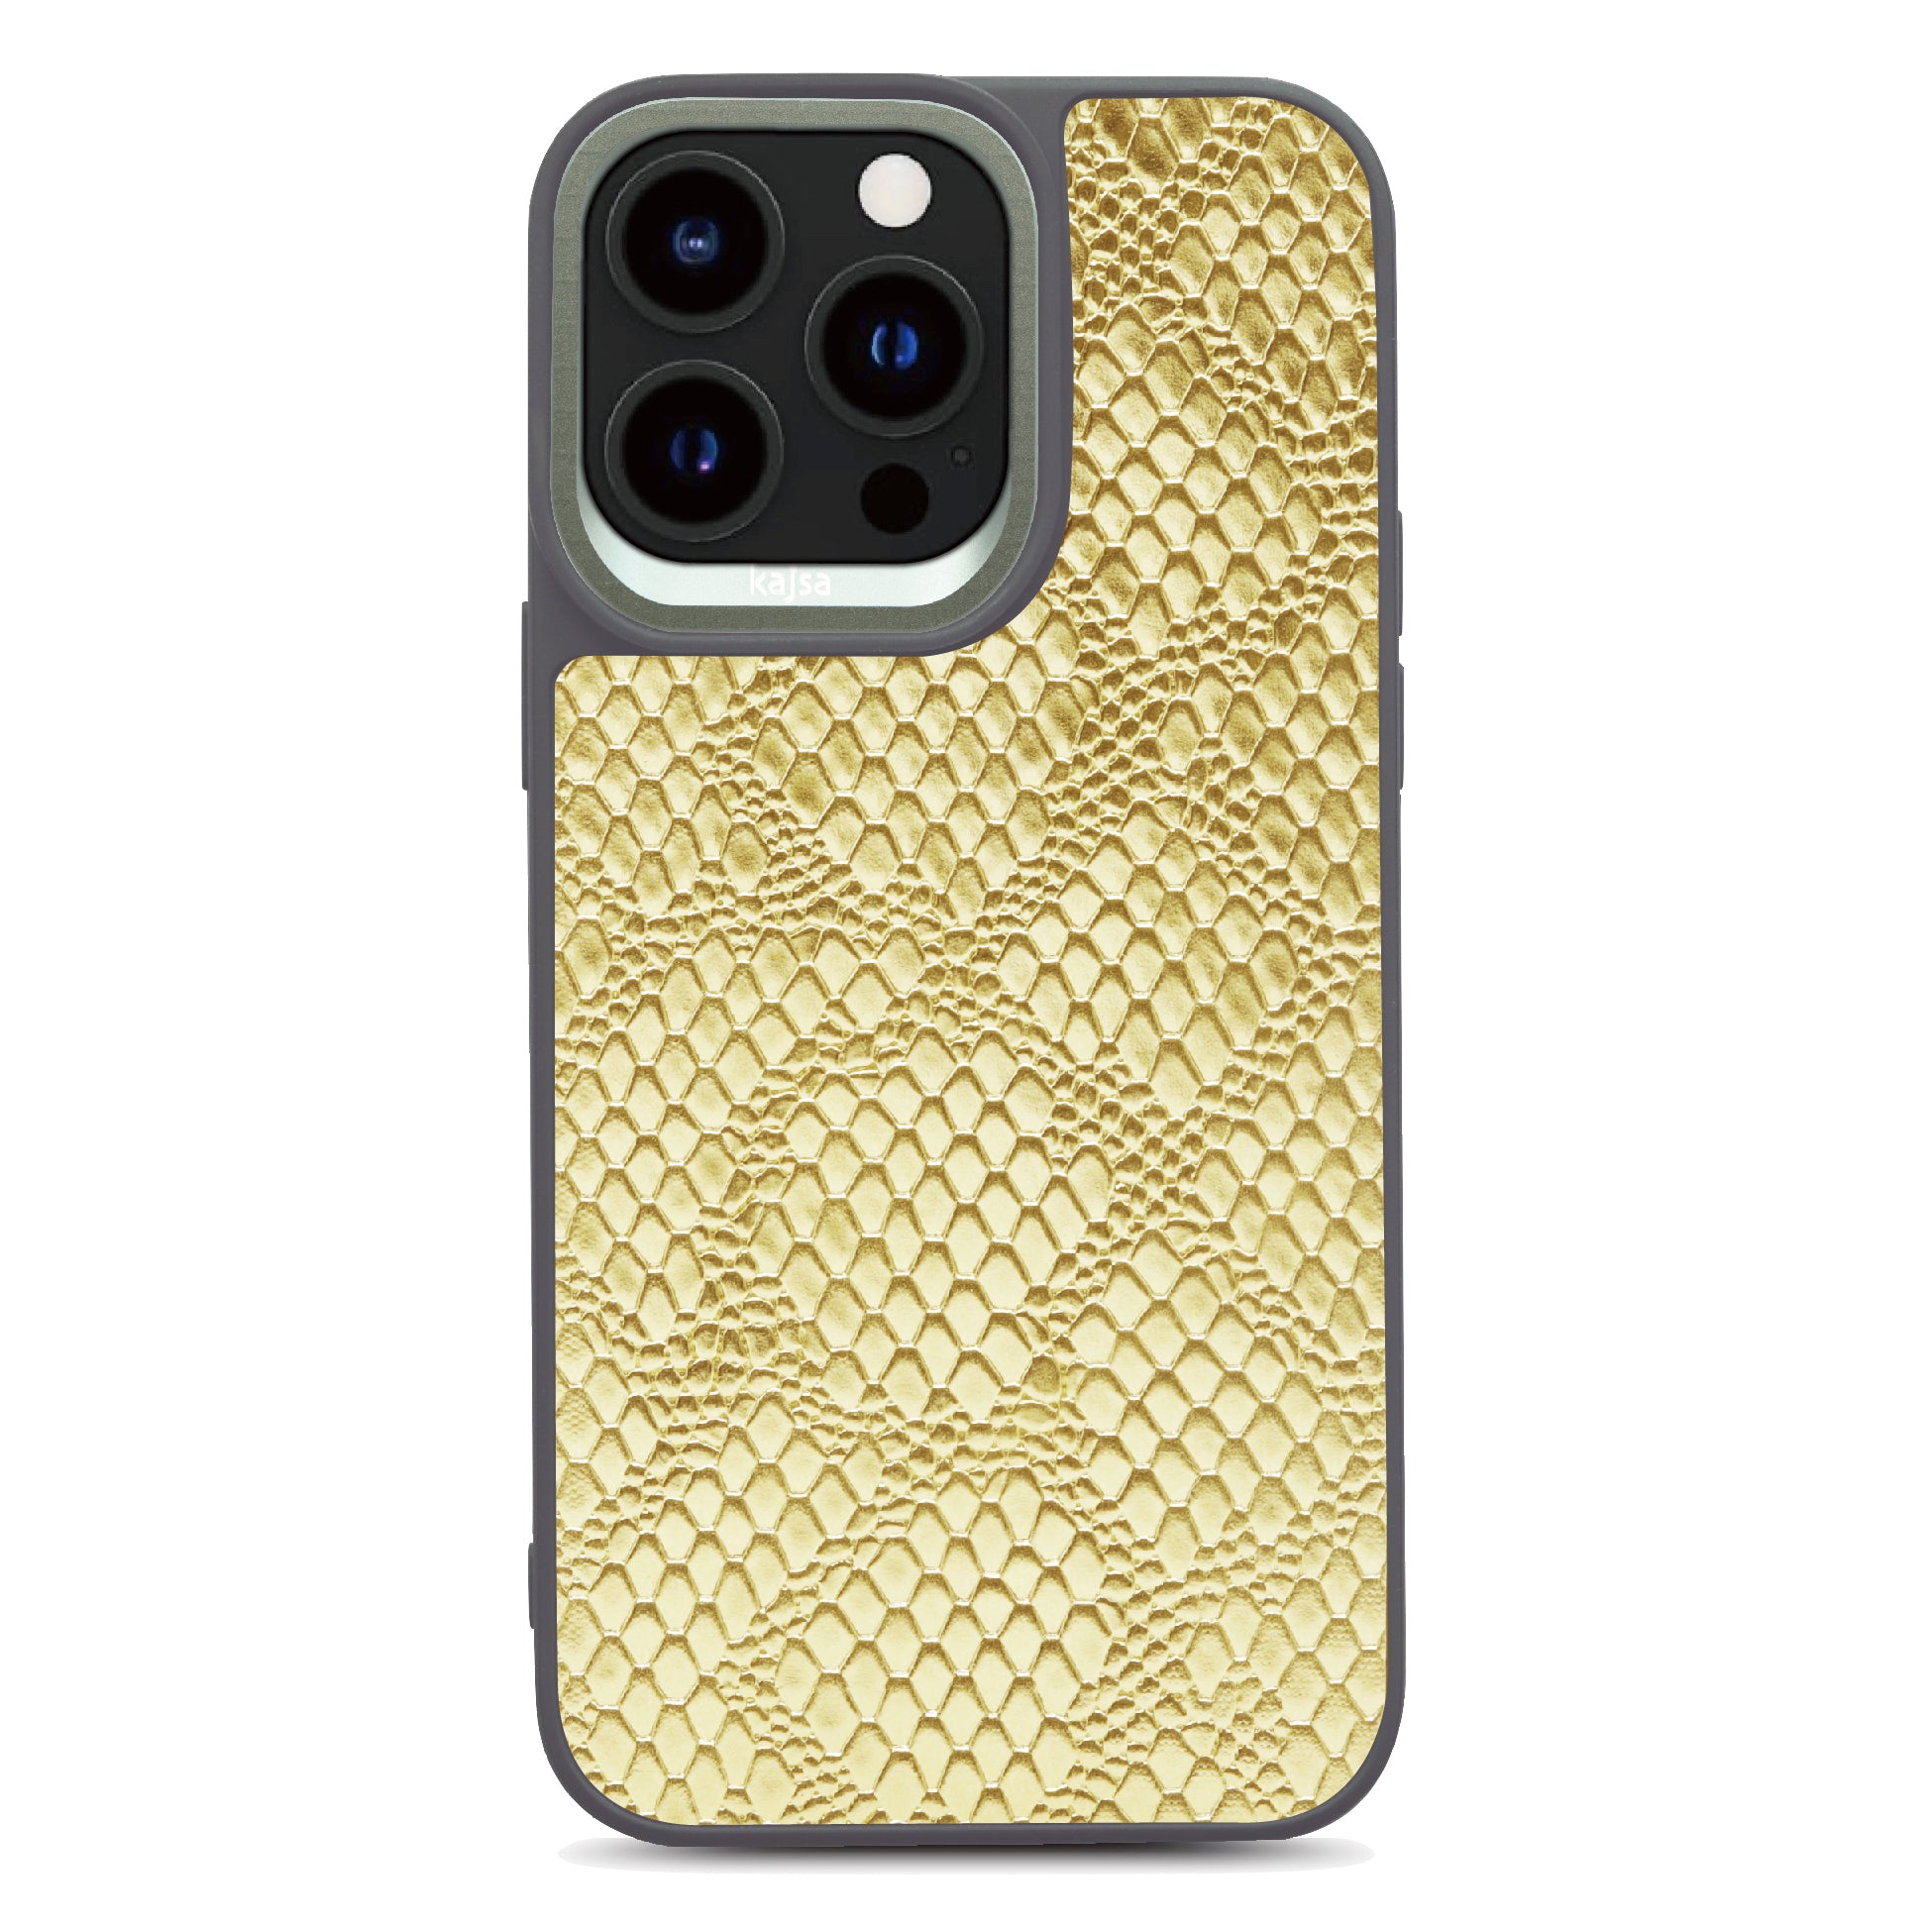 Glamorous Collection - Complex Lizard Back Case for iPhone 14-Phone Case- phone case - phone cases- phone cover- iphone cover- iphone case- iphone cases- leather case- leather cases- DIYCASE - custom case - leather cover - hand strap case - croco pattern case - snake pattern case - carbon fiber phone case - phone case brand - unique phone case - high quality - phone case brand - protective case - buy phone case hong kong - online buy phone case - iphone‎手機殼 - 客製化手機殼 - samsung ‎手機殼 - 香港手機殼 - 買電話殼